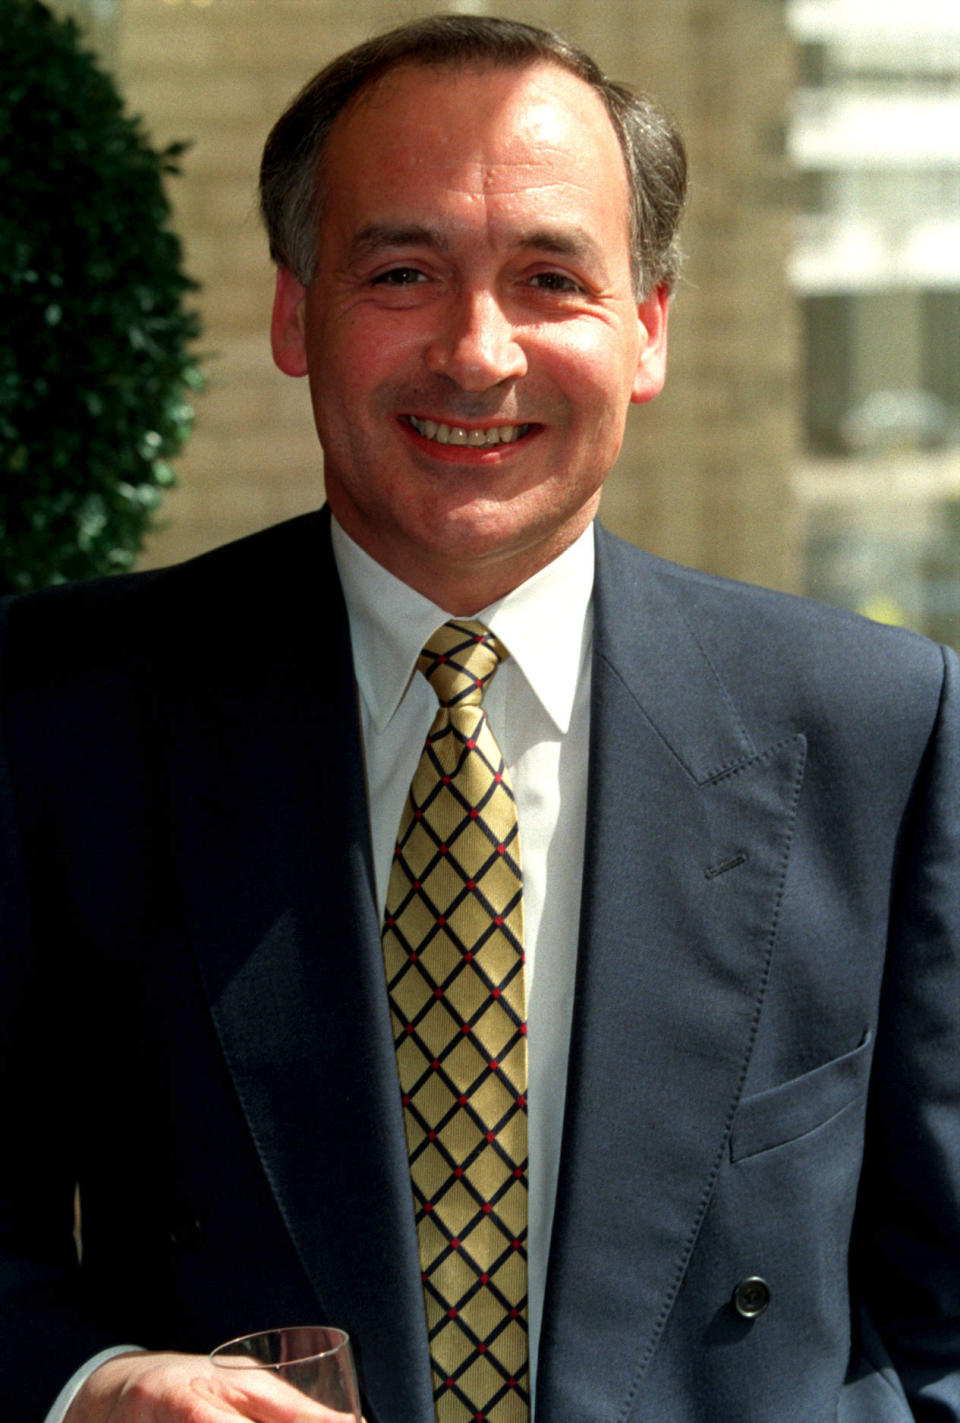 Alastair Stewart wearing a yellow tie and suit